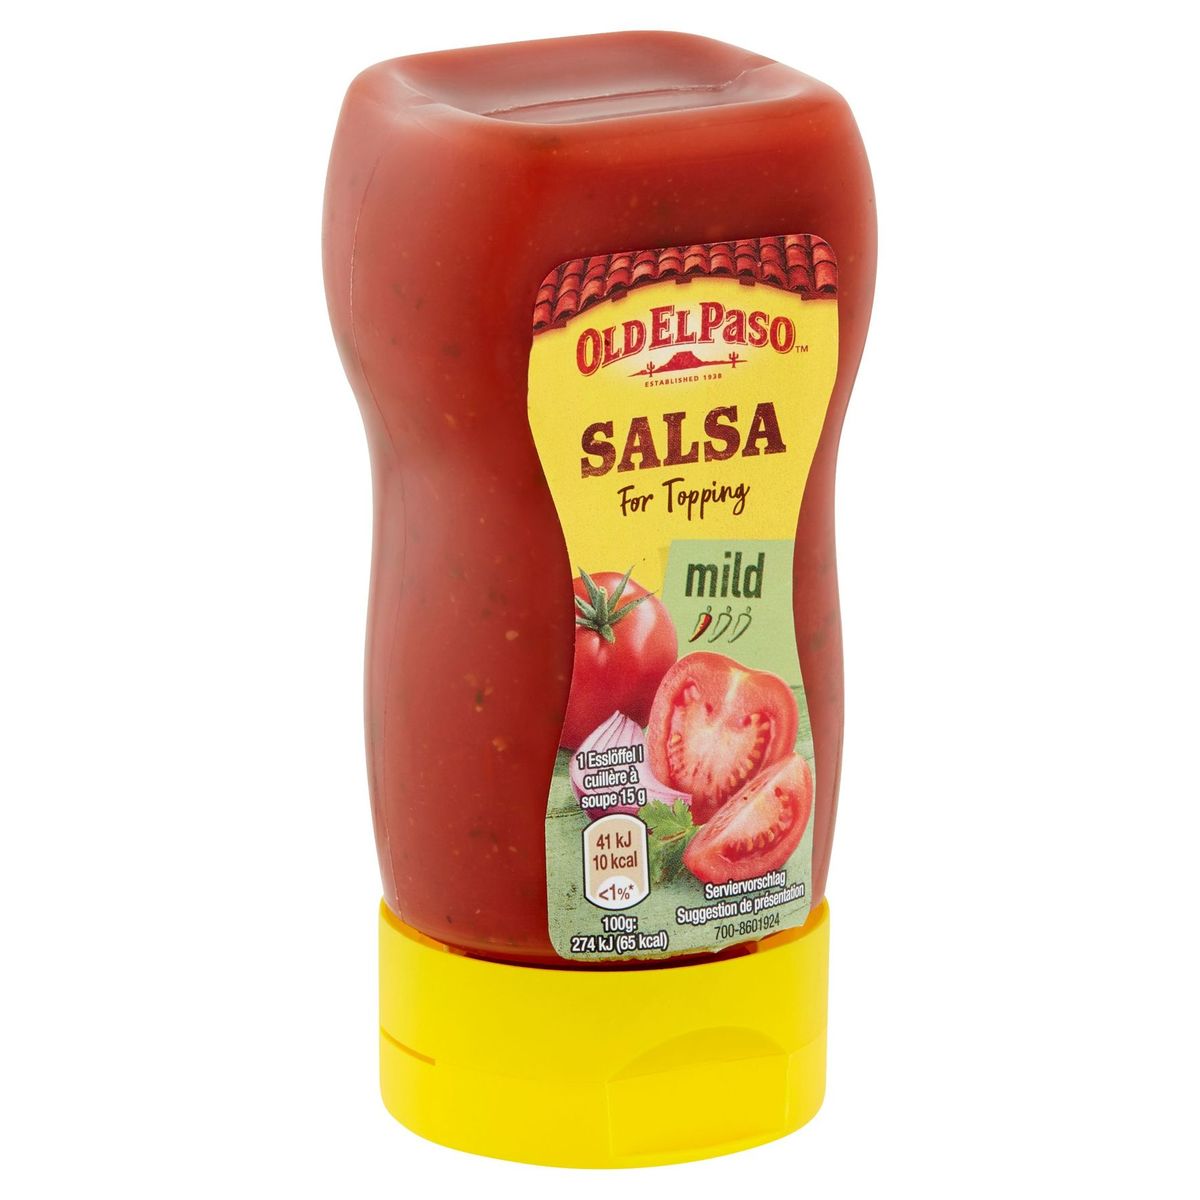 Old El Paso Salsa for Topping 248 g